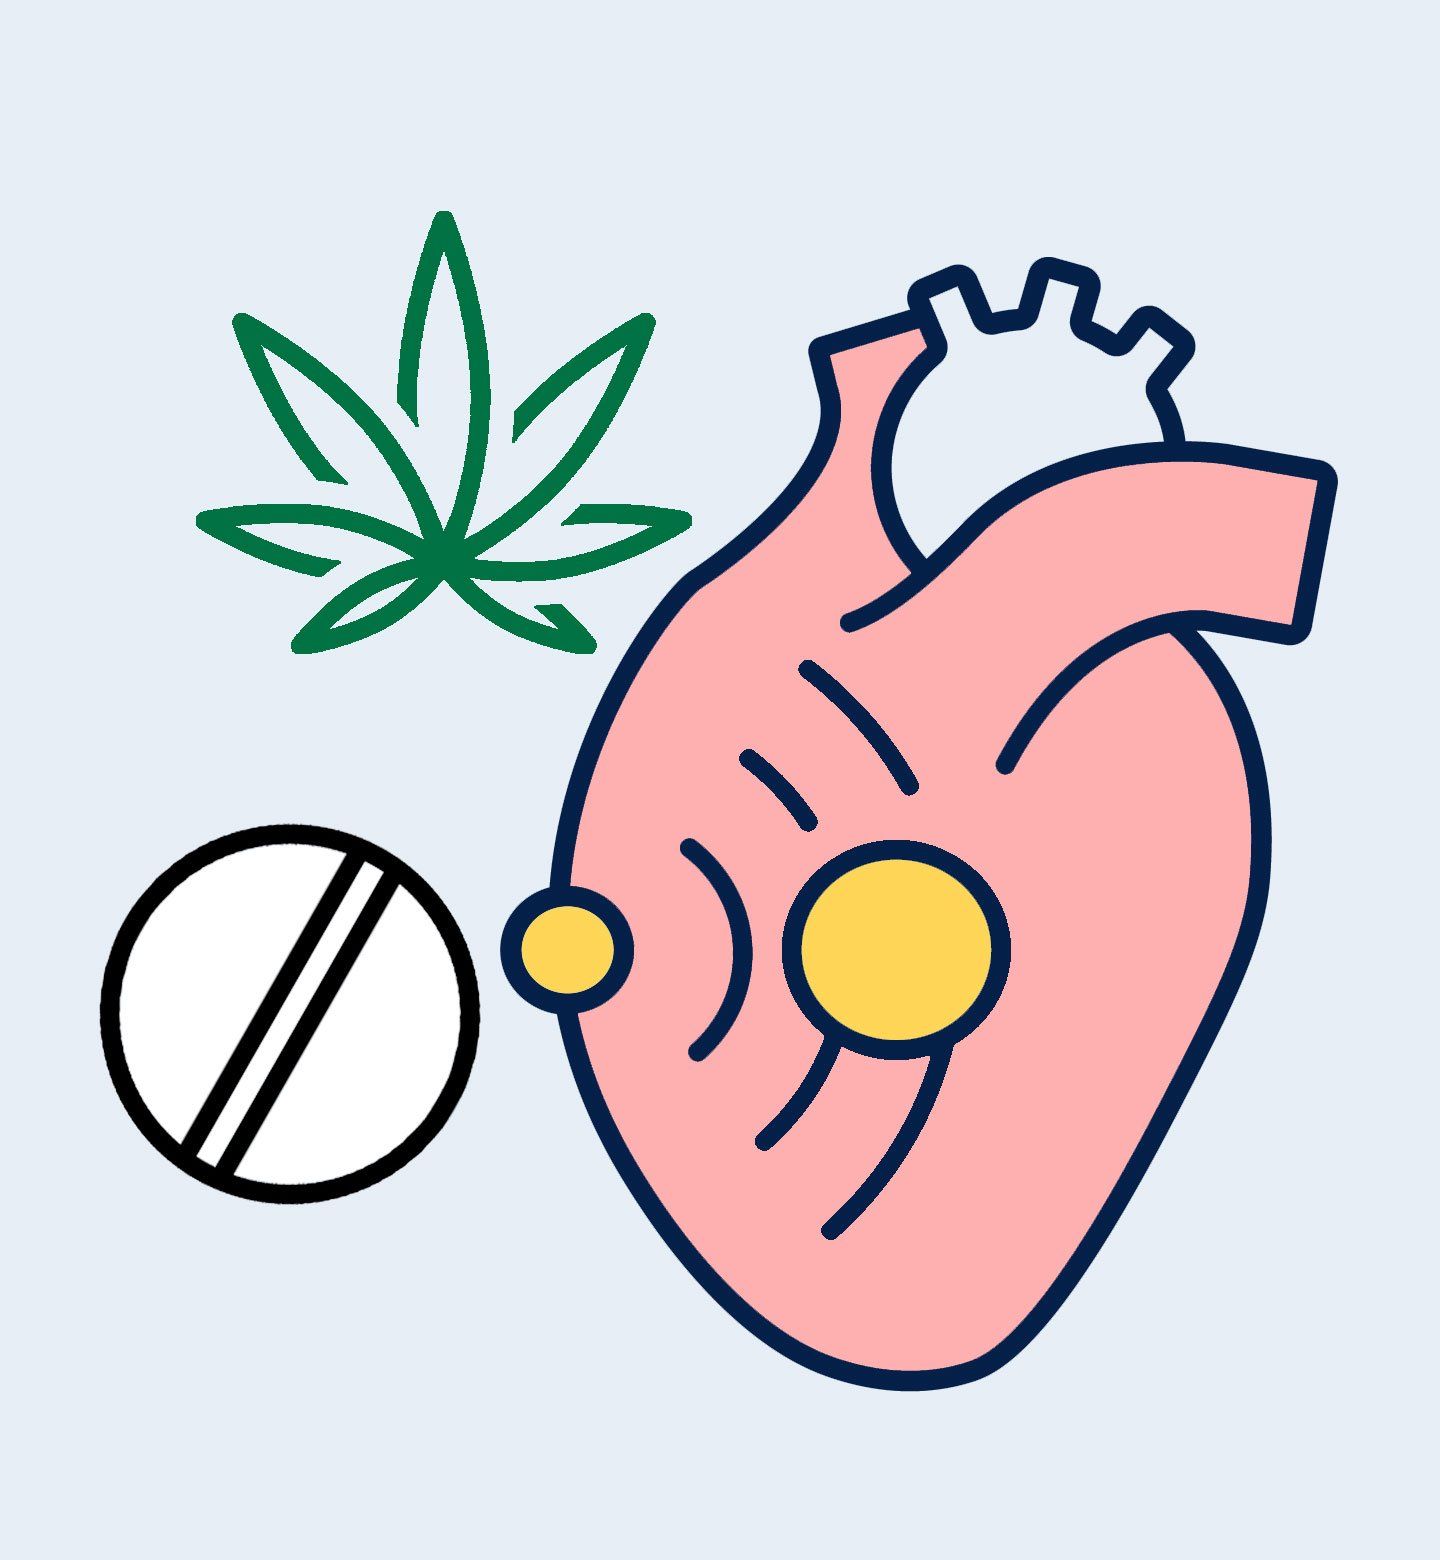 schematic showing a heart and drug paraphenalia